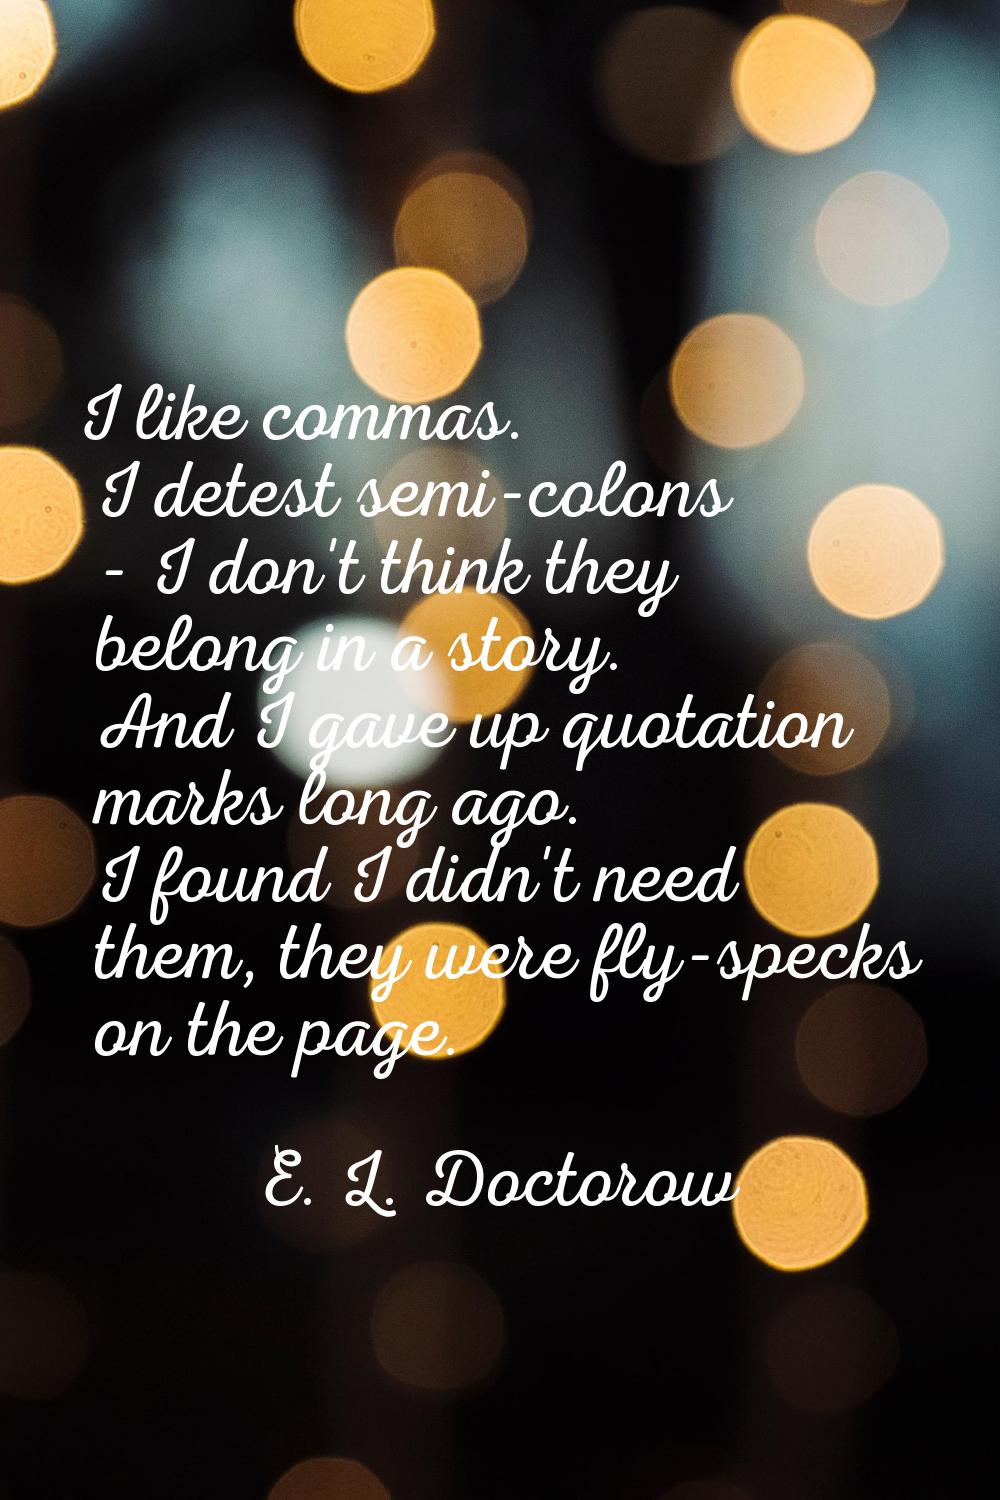 I like commas. I detest semi-colons - I don't think they belong in a story. And I gave up quotation